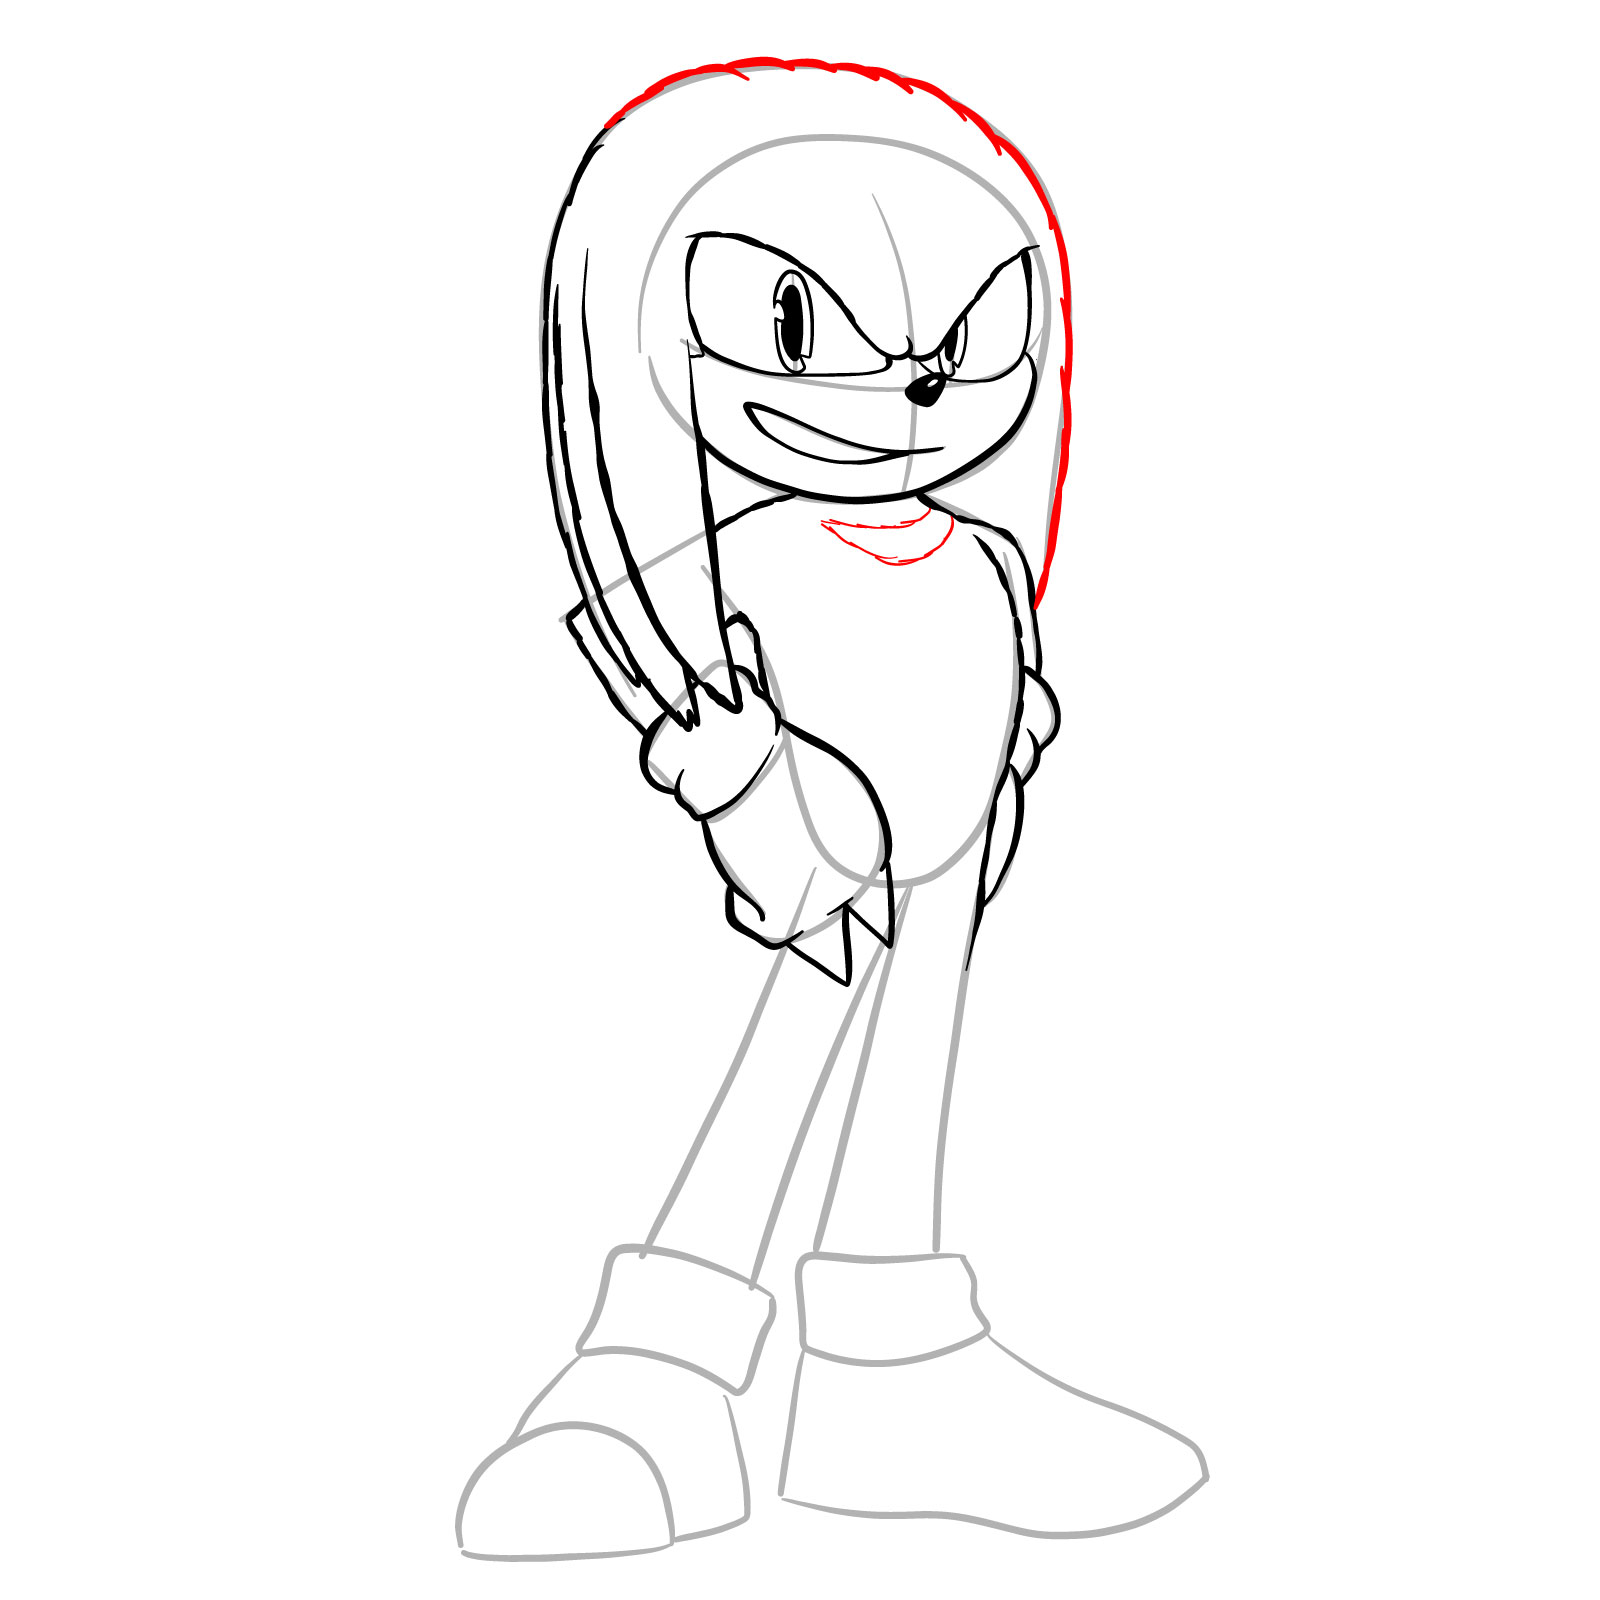 How to draw Knuckles from the movie - step 17